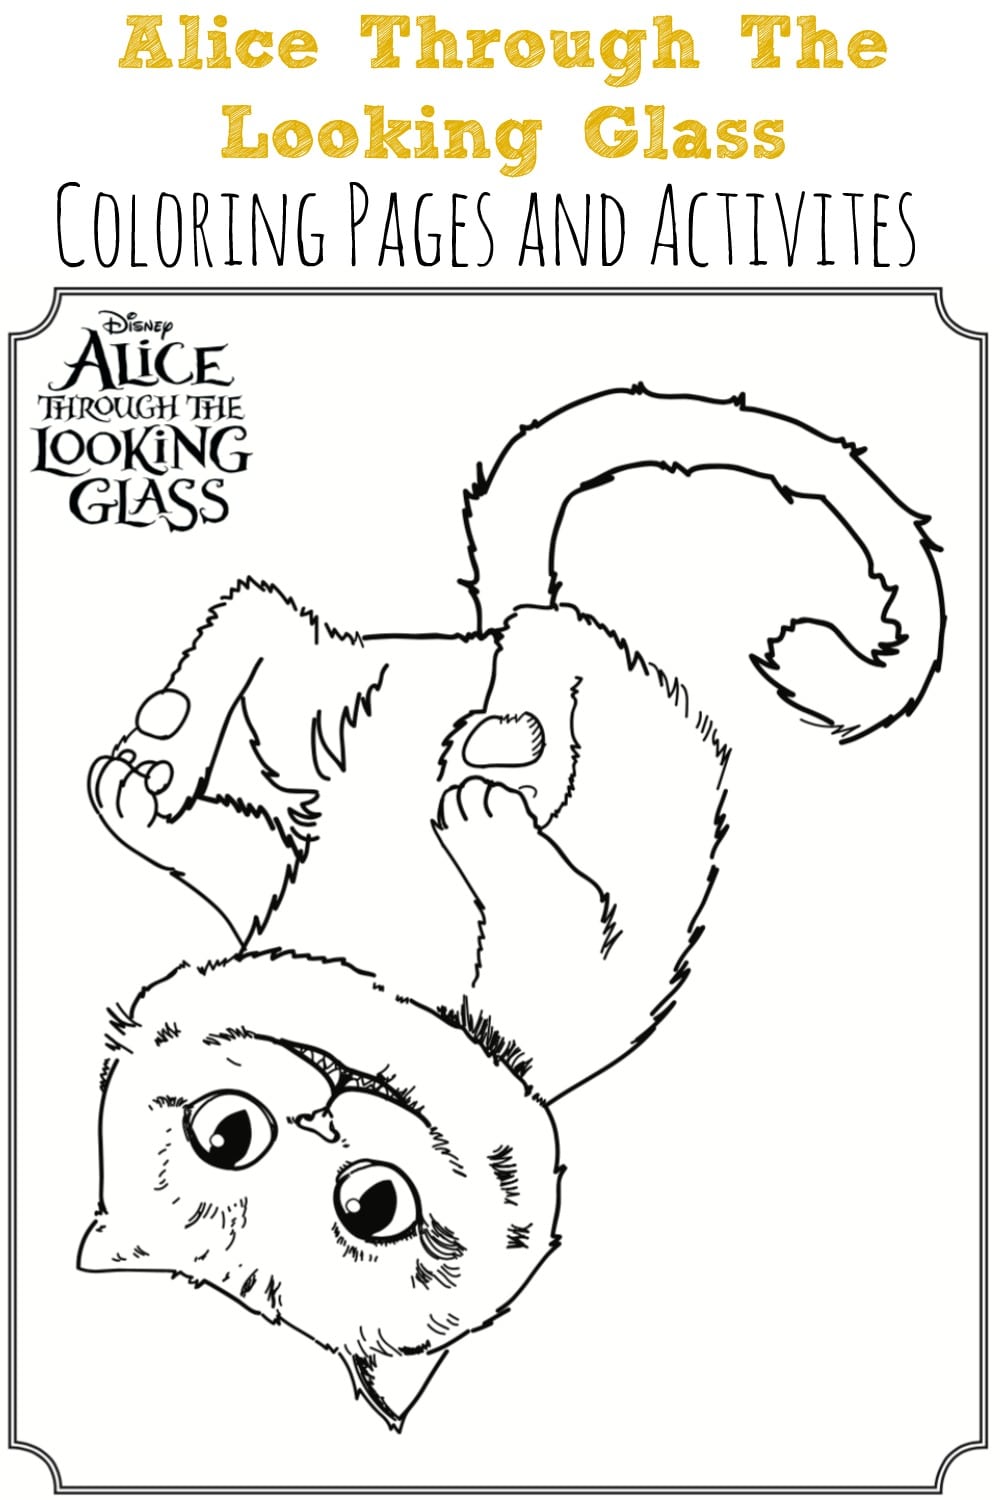 Alice Through The Looking Glass Coloring Sheets #ThroughTheLookingGlass